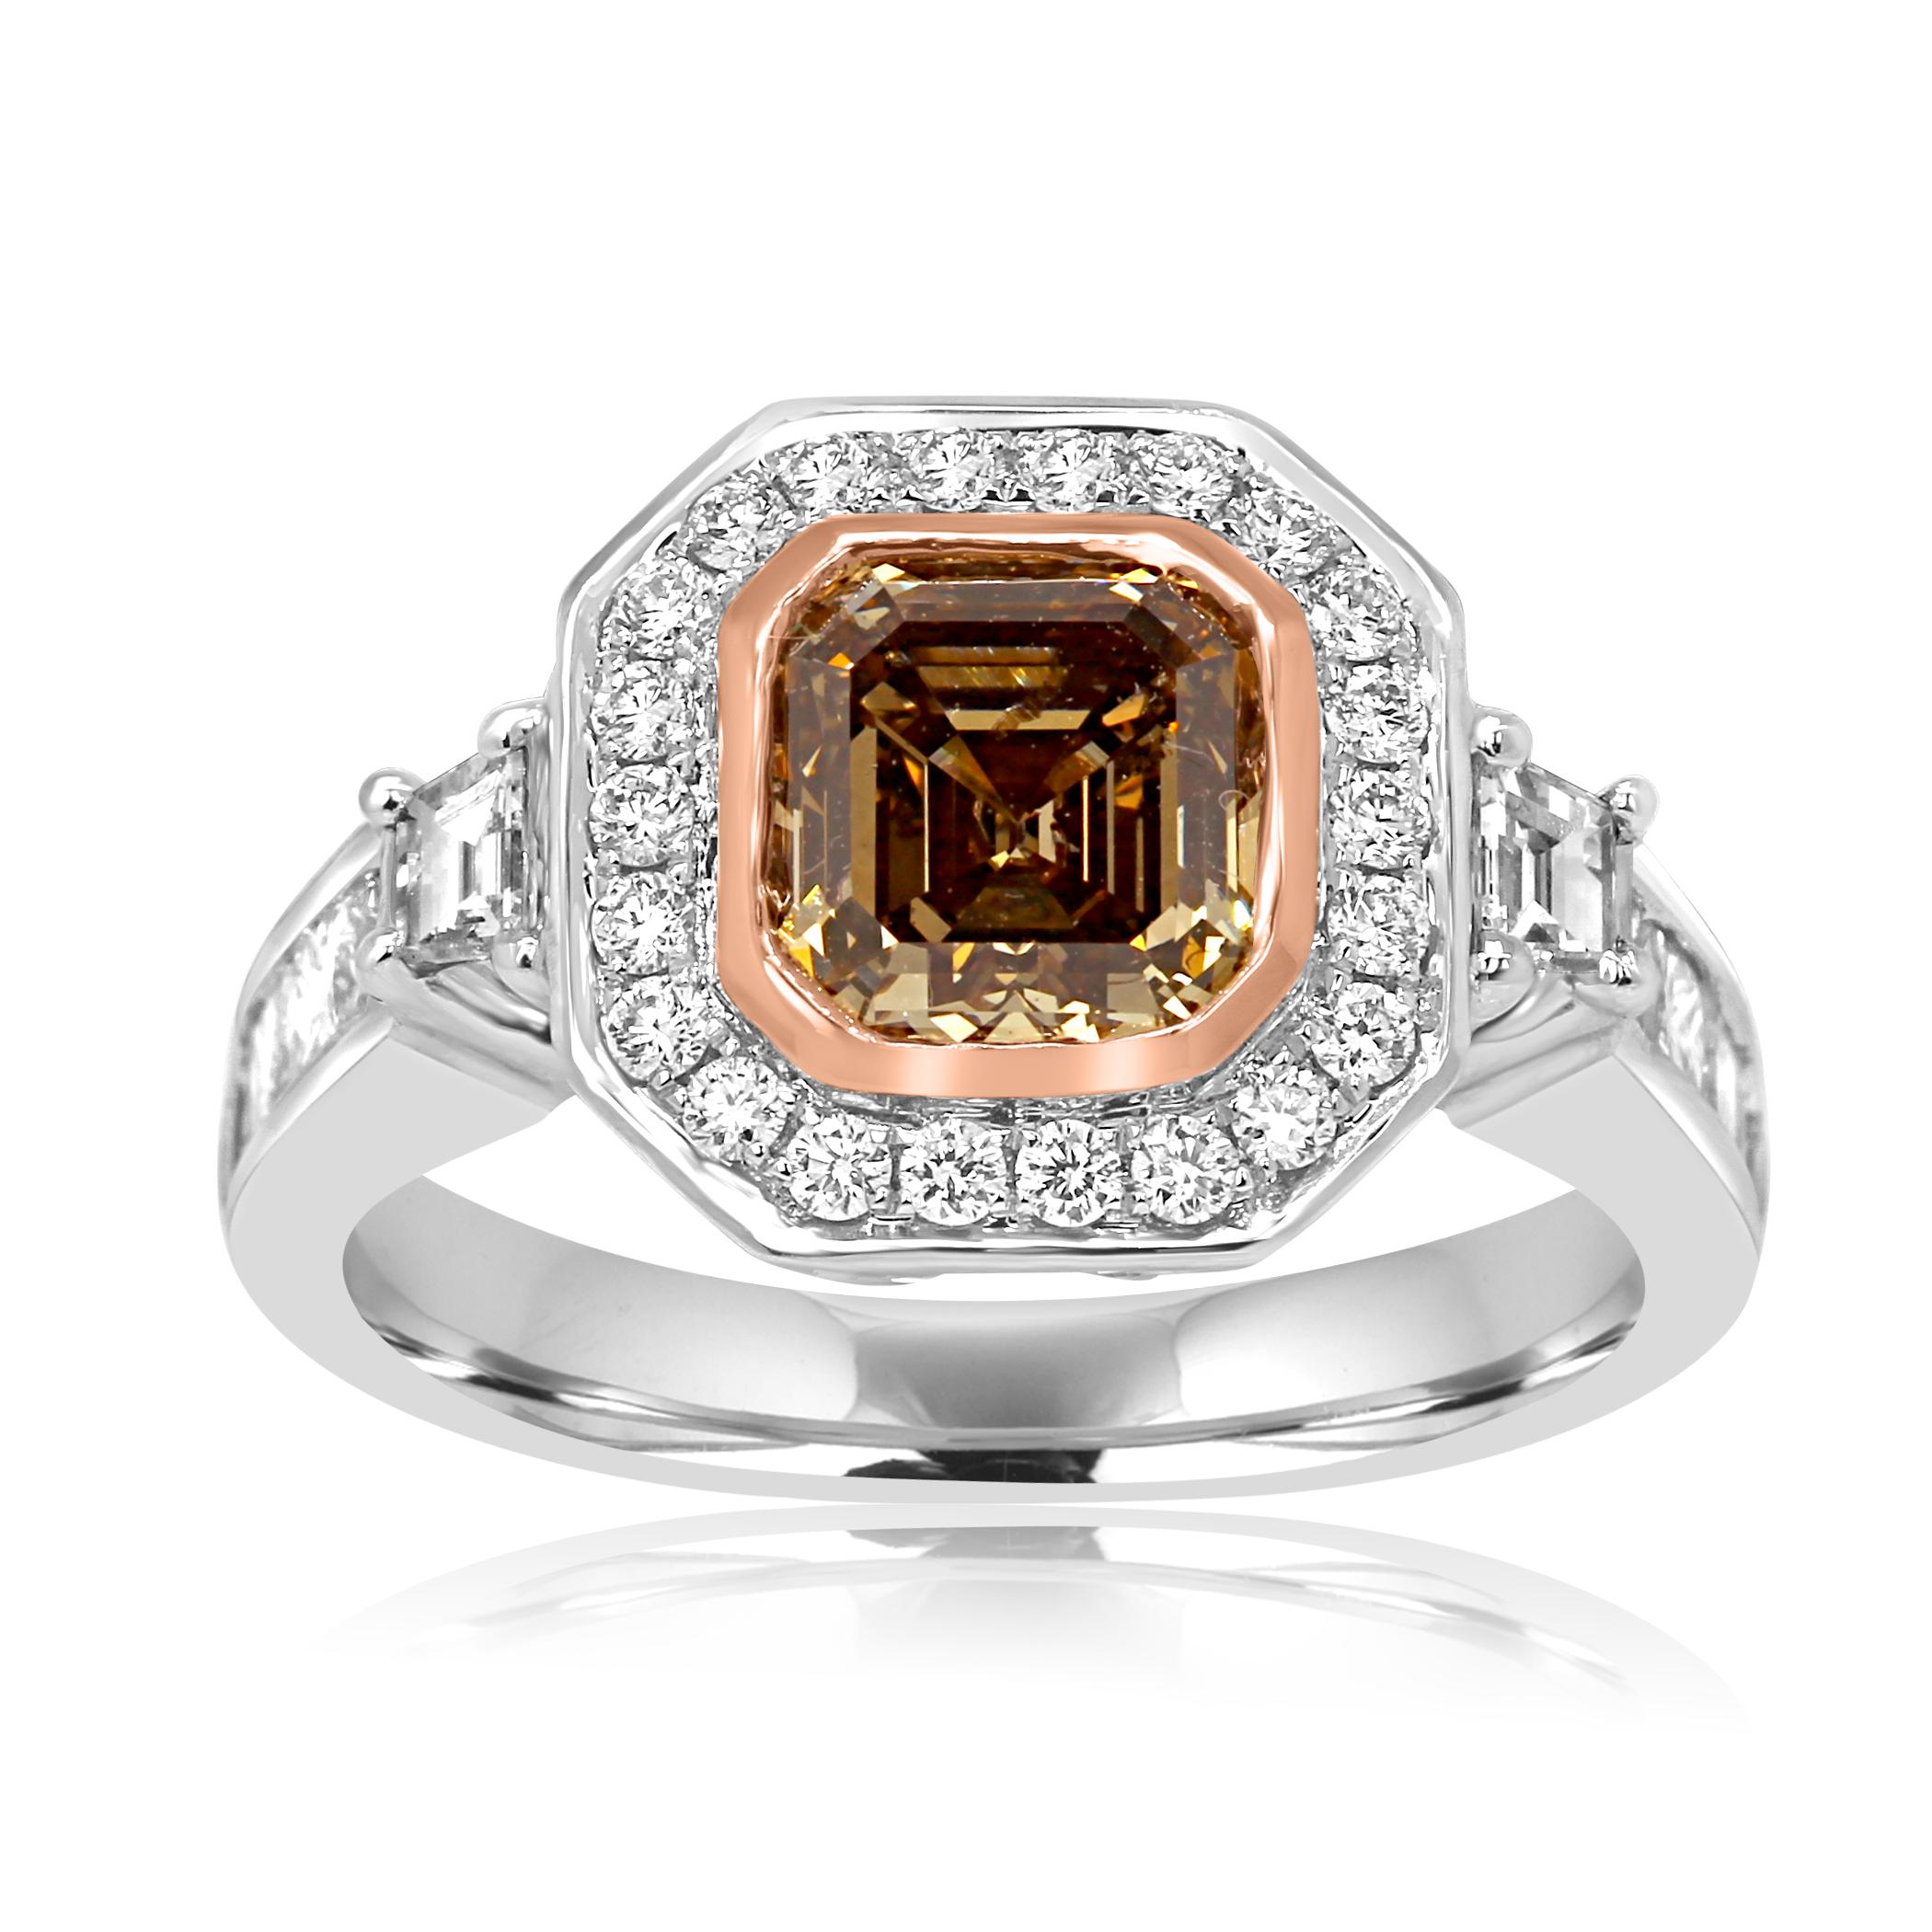 Gorgeous Square Emerald Cut Champagne Diamond VS-SI Clarity Encircled in a single Halo of       26 G-H Color VS-SI Diamond Round 0.25 carat Flanked with 2 G-H Color VS-SI Clarity Diamond Trapazoid 0.18 Carat with 8 G-H Color VS-SI Diamond Princess